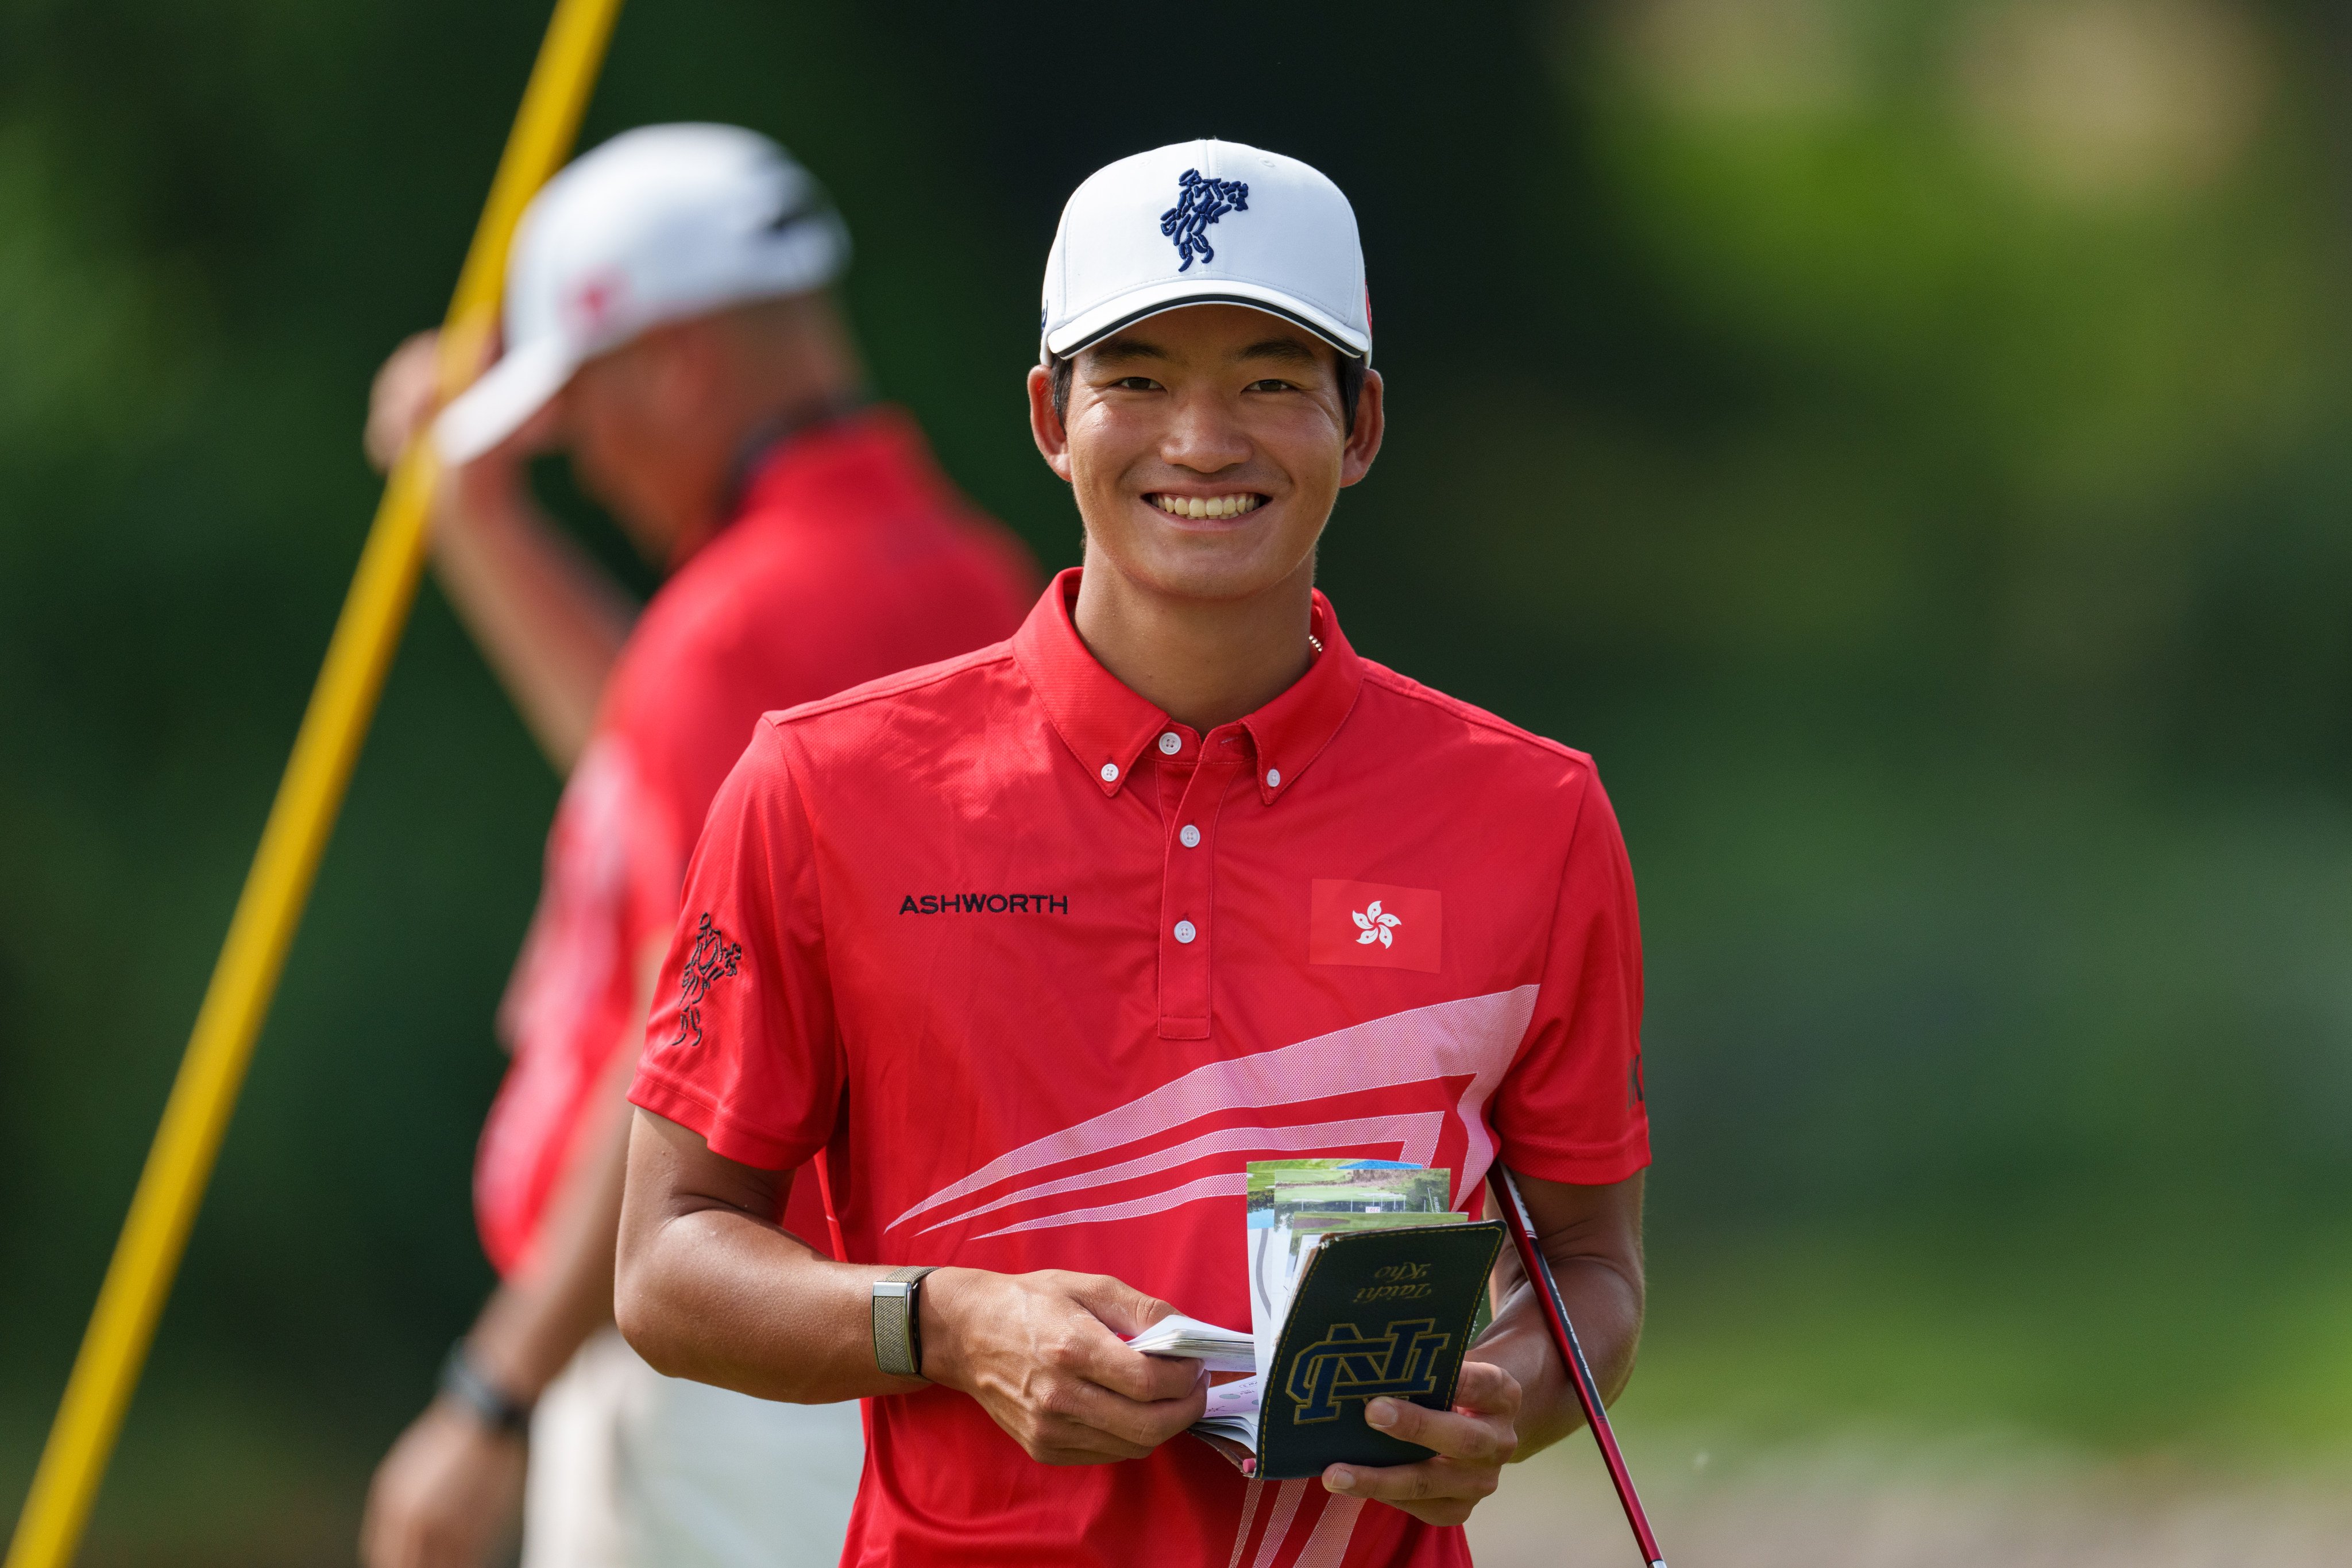 Taichi Kho of Hong Kong has a growing number of opportunities to smile about in golf’s changing landscape. Photo: AAC